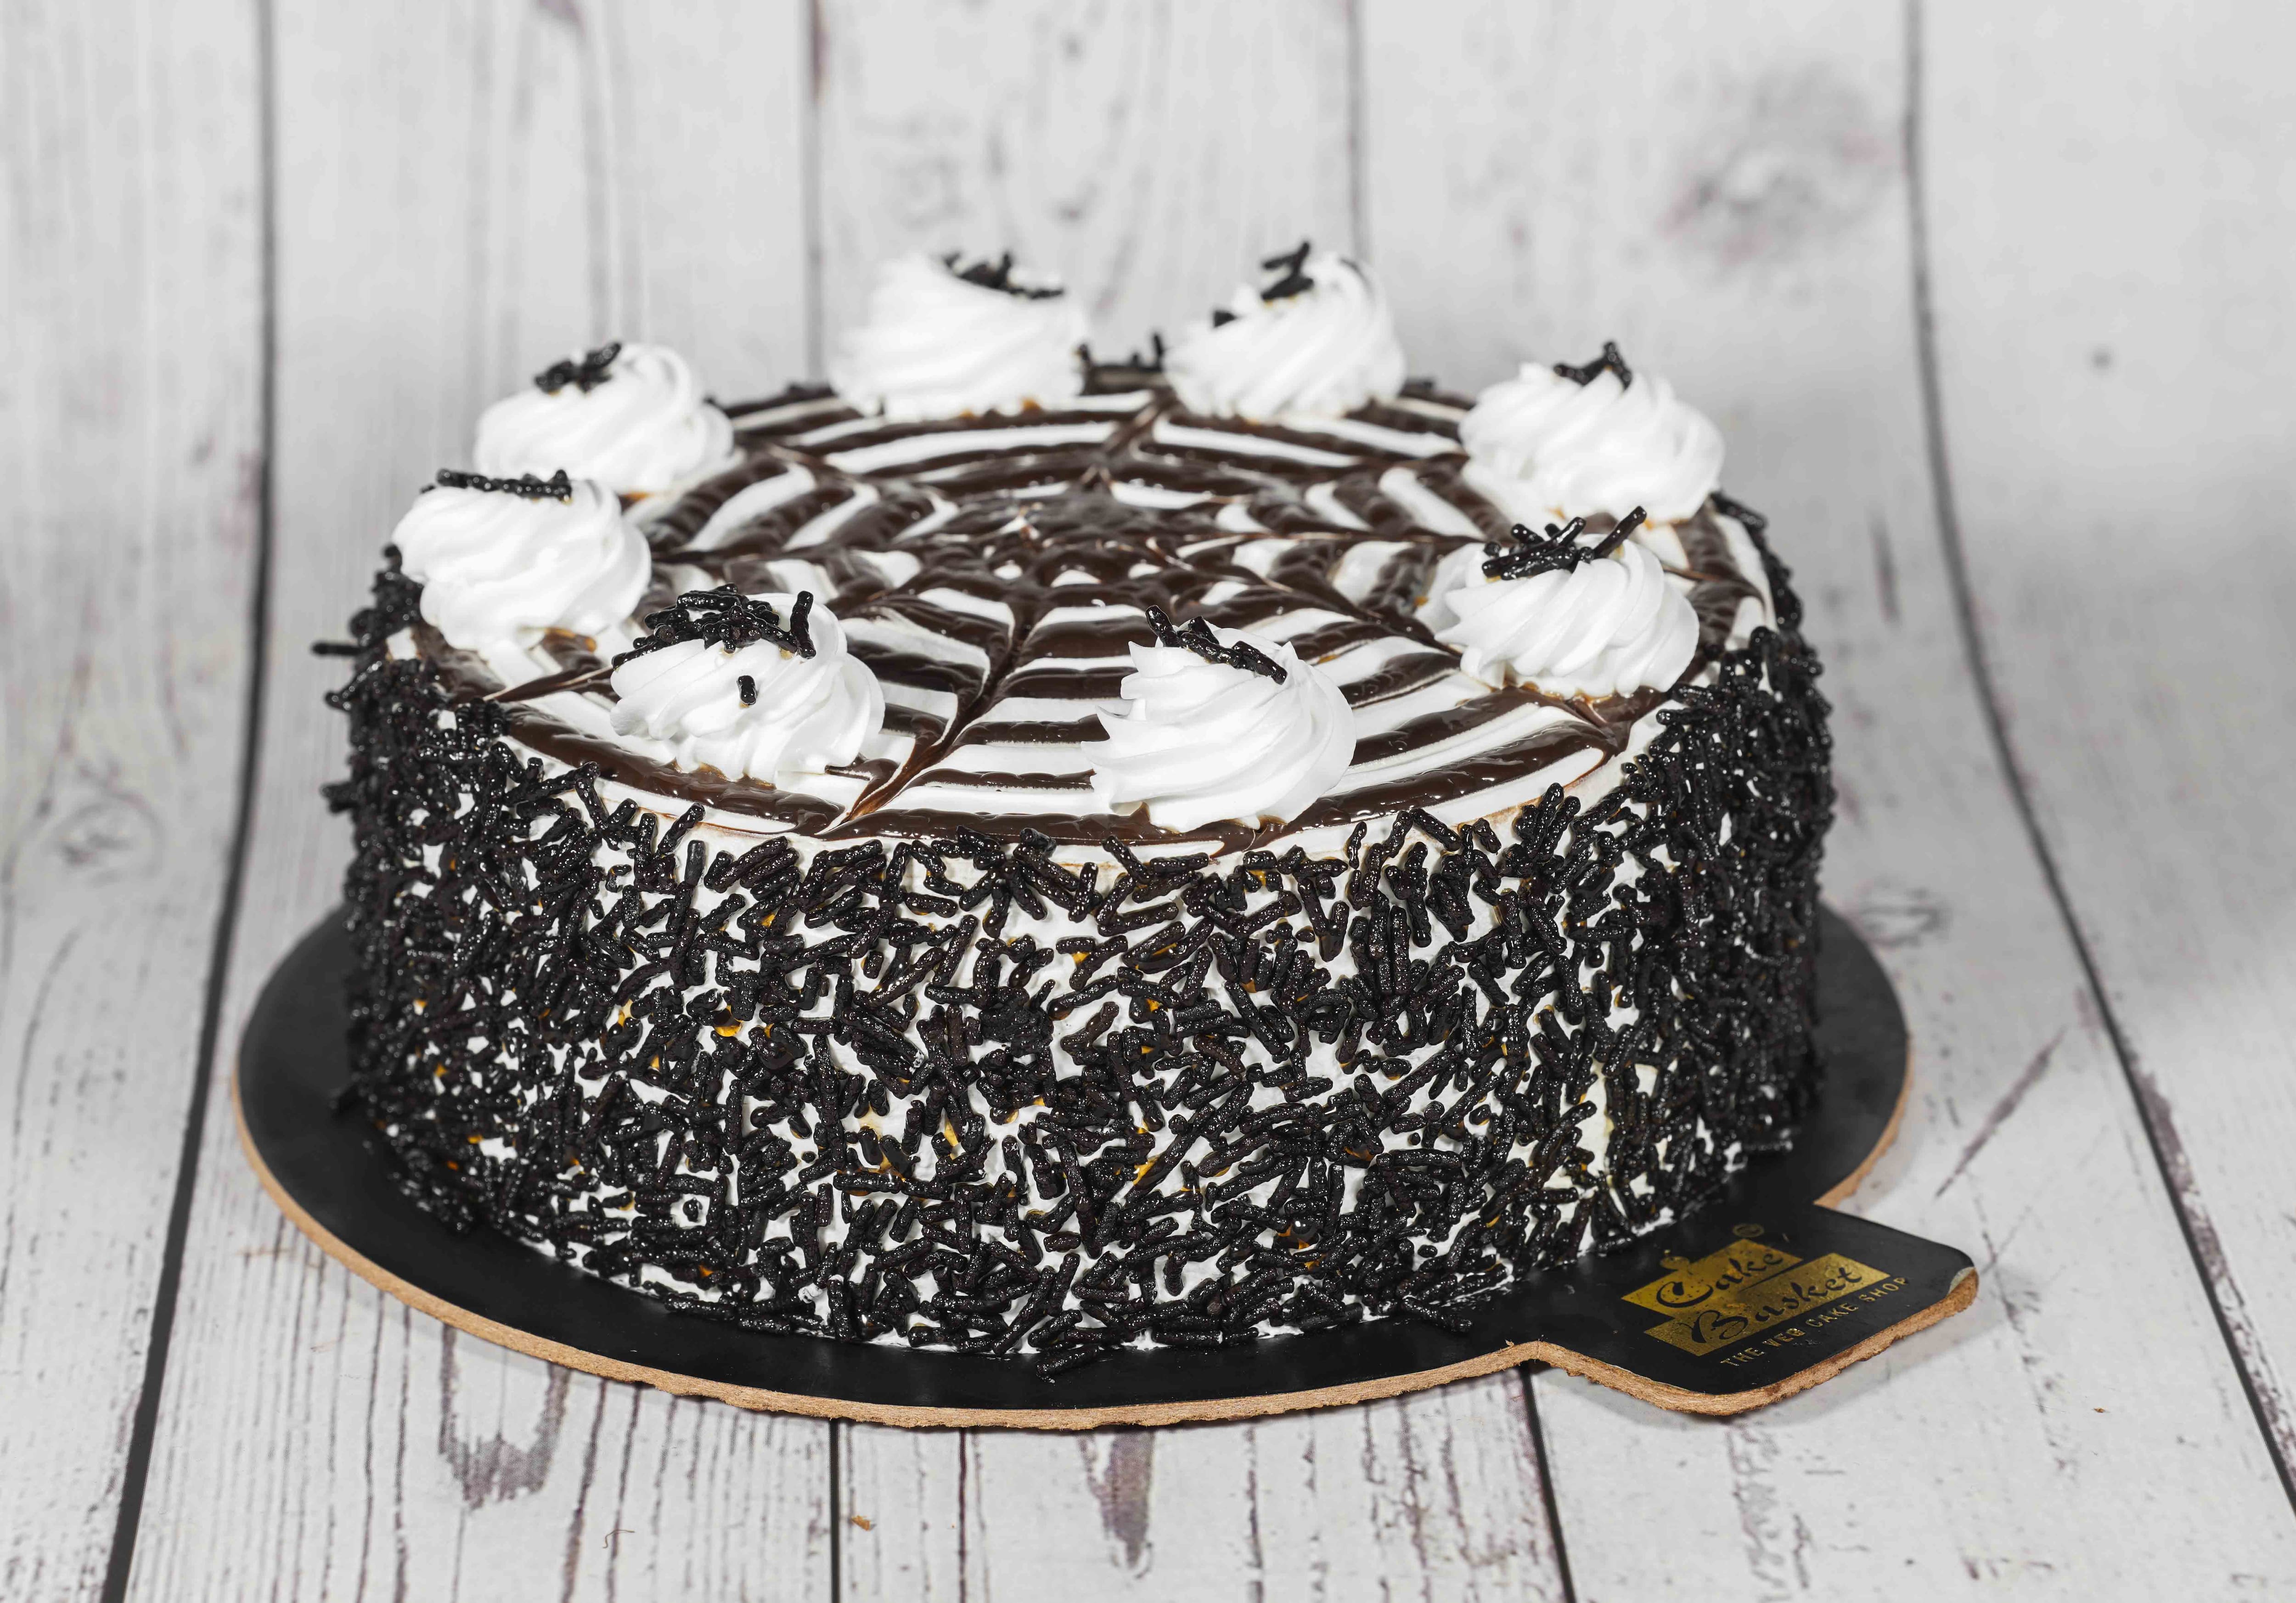 Buy Bakers Basket Fresh Cakes - Chocolate Temptation Online at Best Price  of Rs null - bigbasket